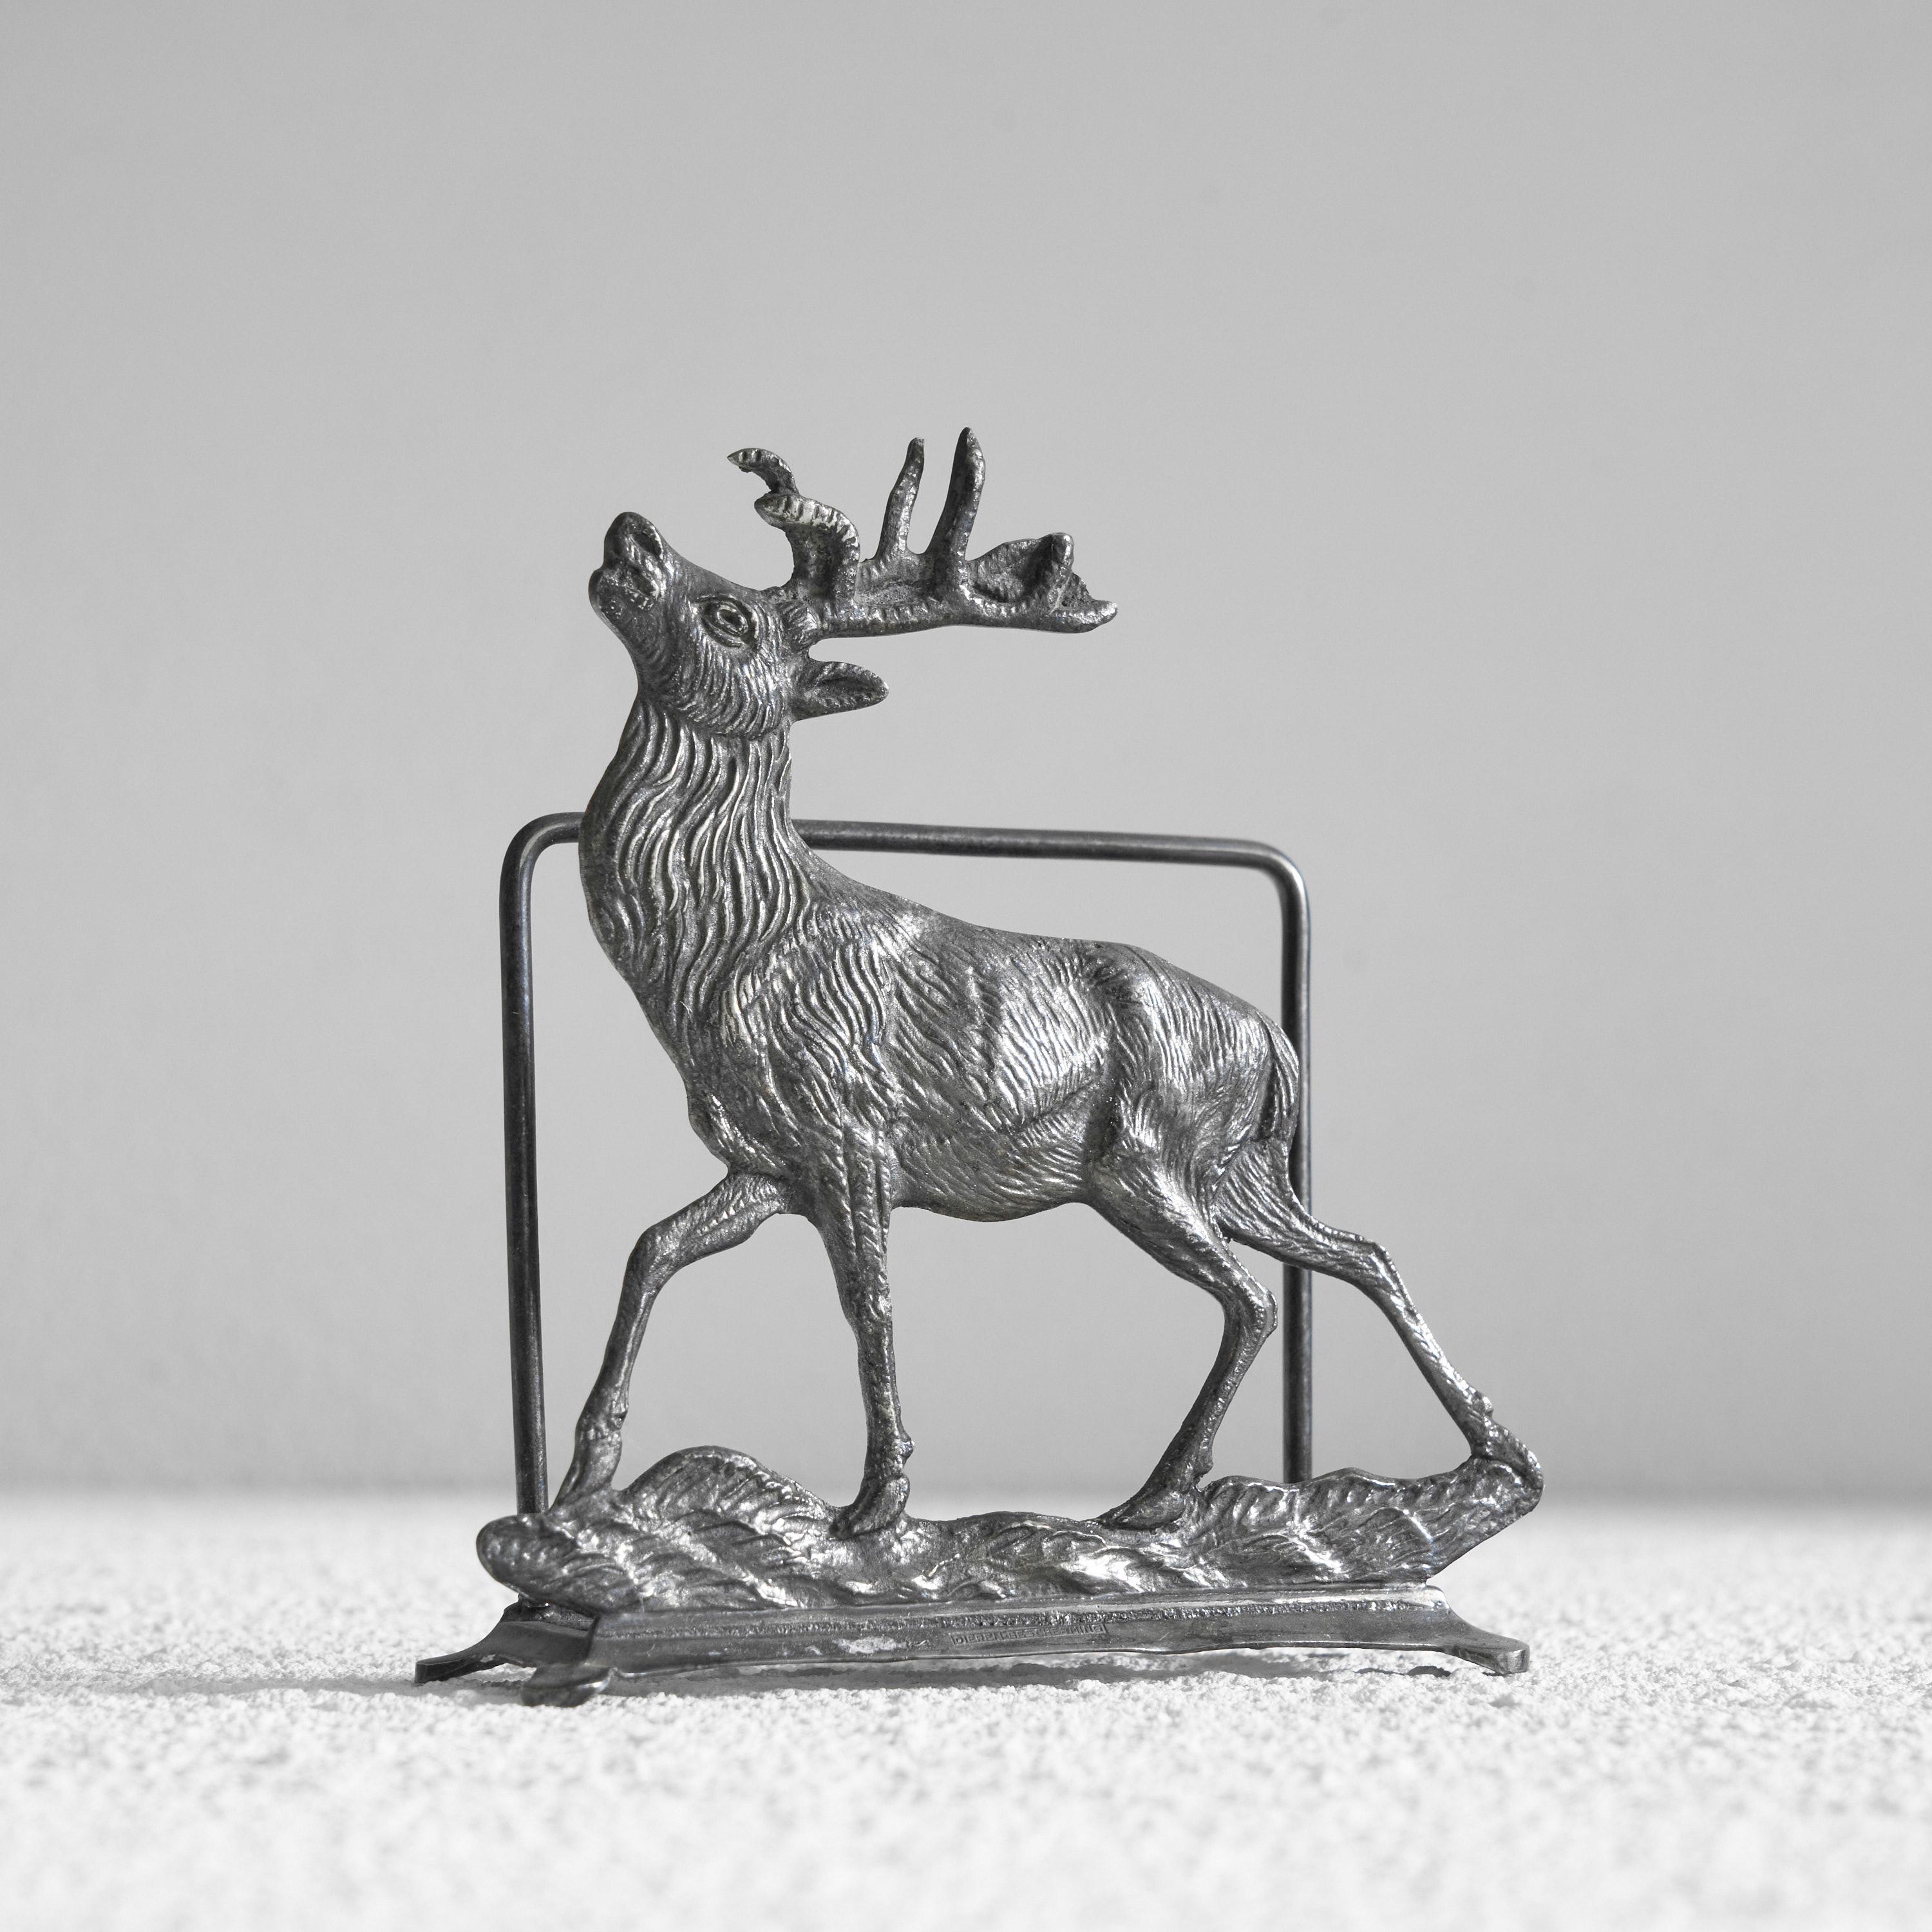 Decorative 'Deer' Napkin Holder. Netherlands, early 20th century.

Very stylish and decorative napkin holder with a deer at the front. A very elegant and timeless piece which suits many interior styles. A fun piece for use on your breakfast table